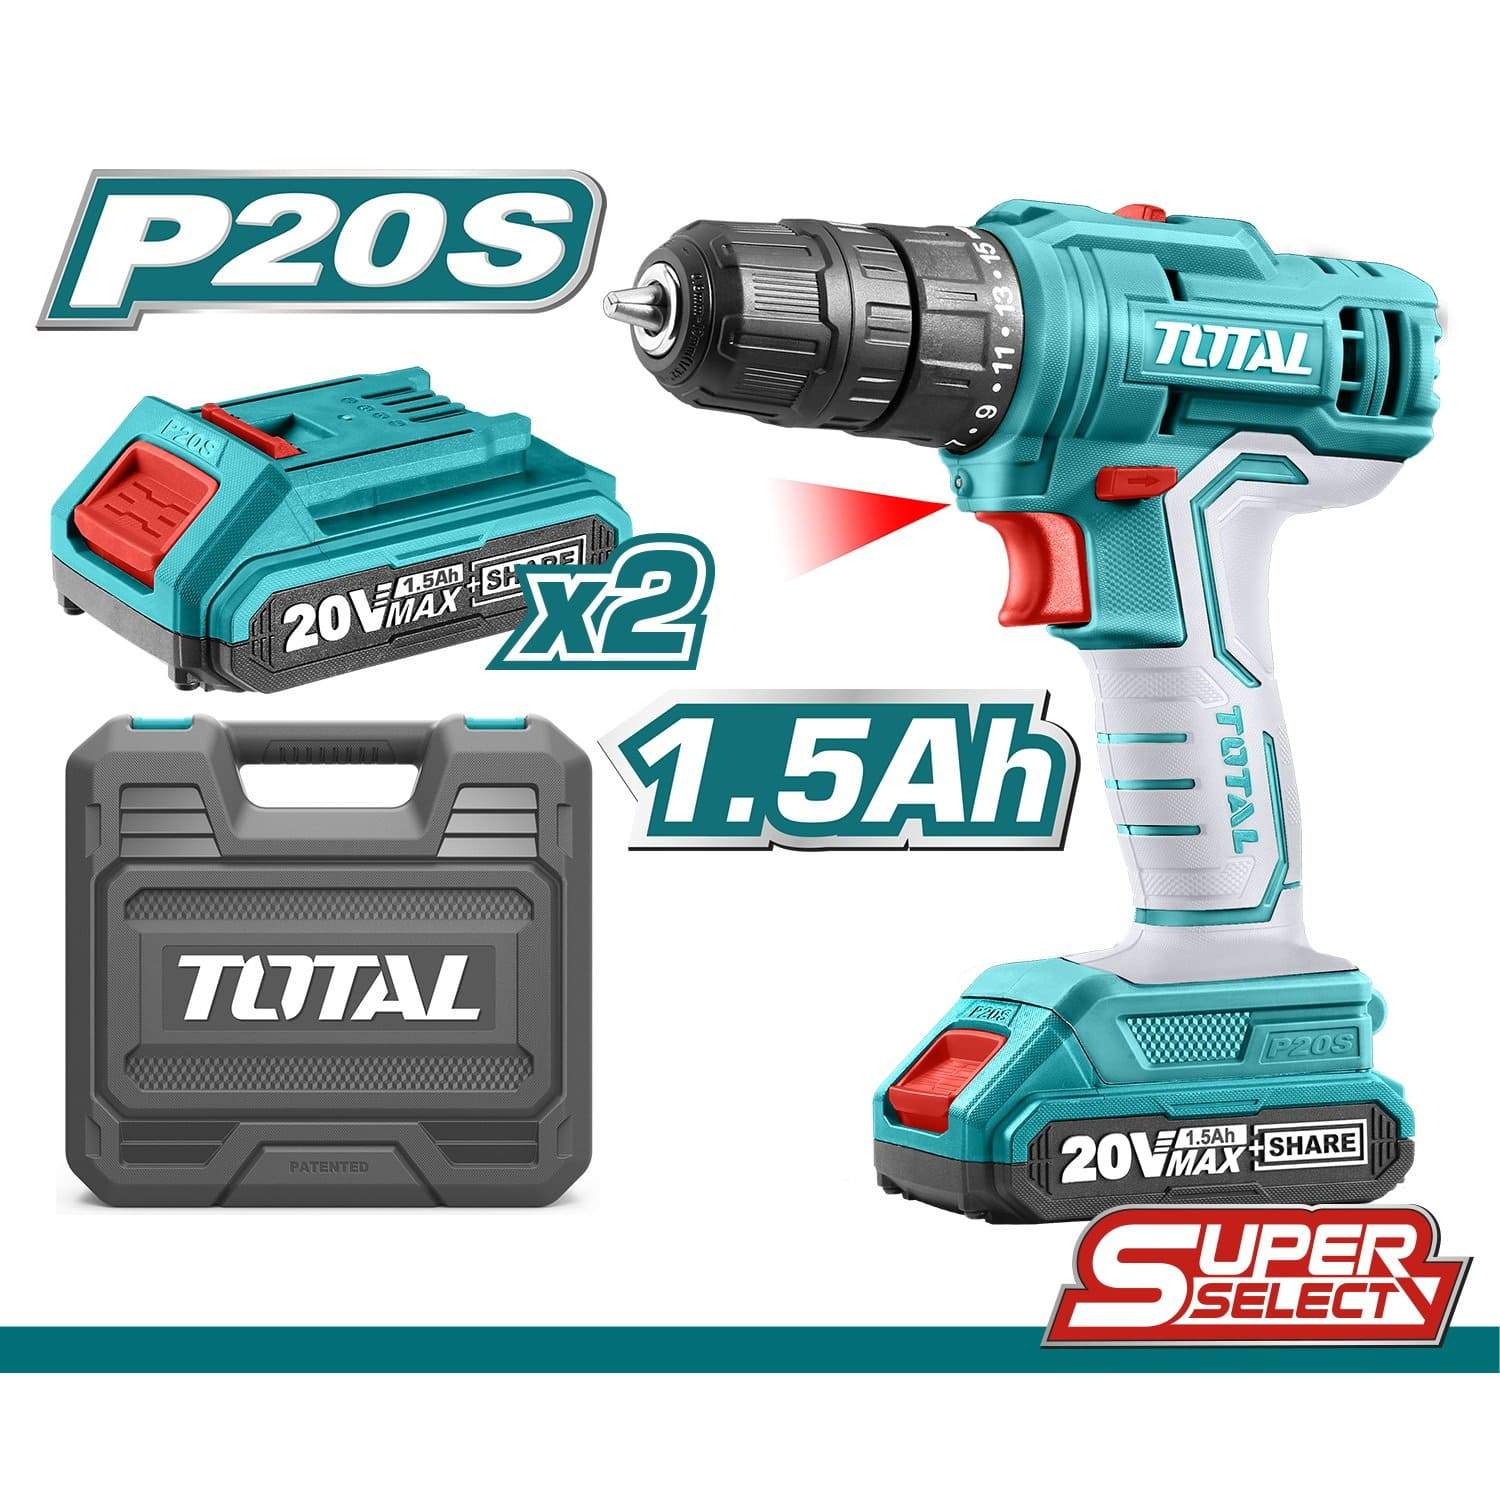 Total Lithium-Ion Cordless Drill 20V with Two Batteries - TDLI20012 | Supply Master | Accra, Ghana Tools Building Steel Engineering Hardware tool